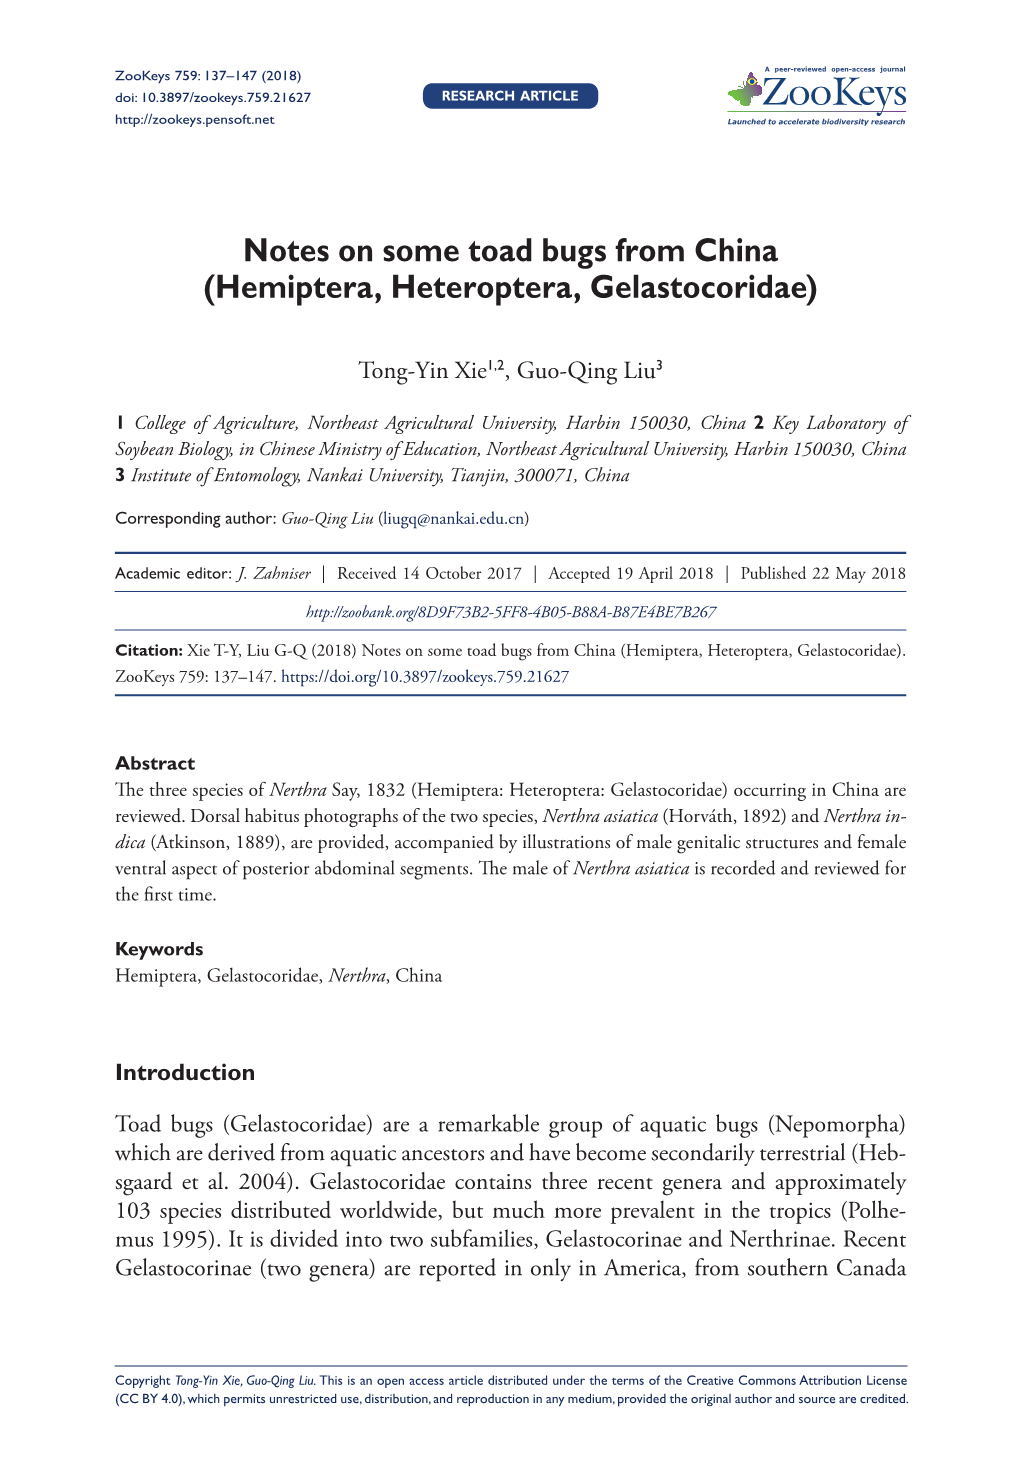 Hemiptera, Heteroptera, Gelastocoridae) 137 Doi: 10.3897/Zookeys.759.21627 RESEARCH ARTICLE Launched to Accelerate Biodiversity Research